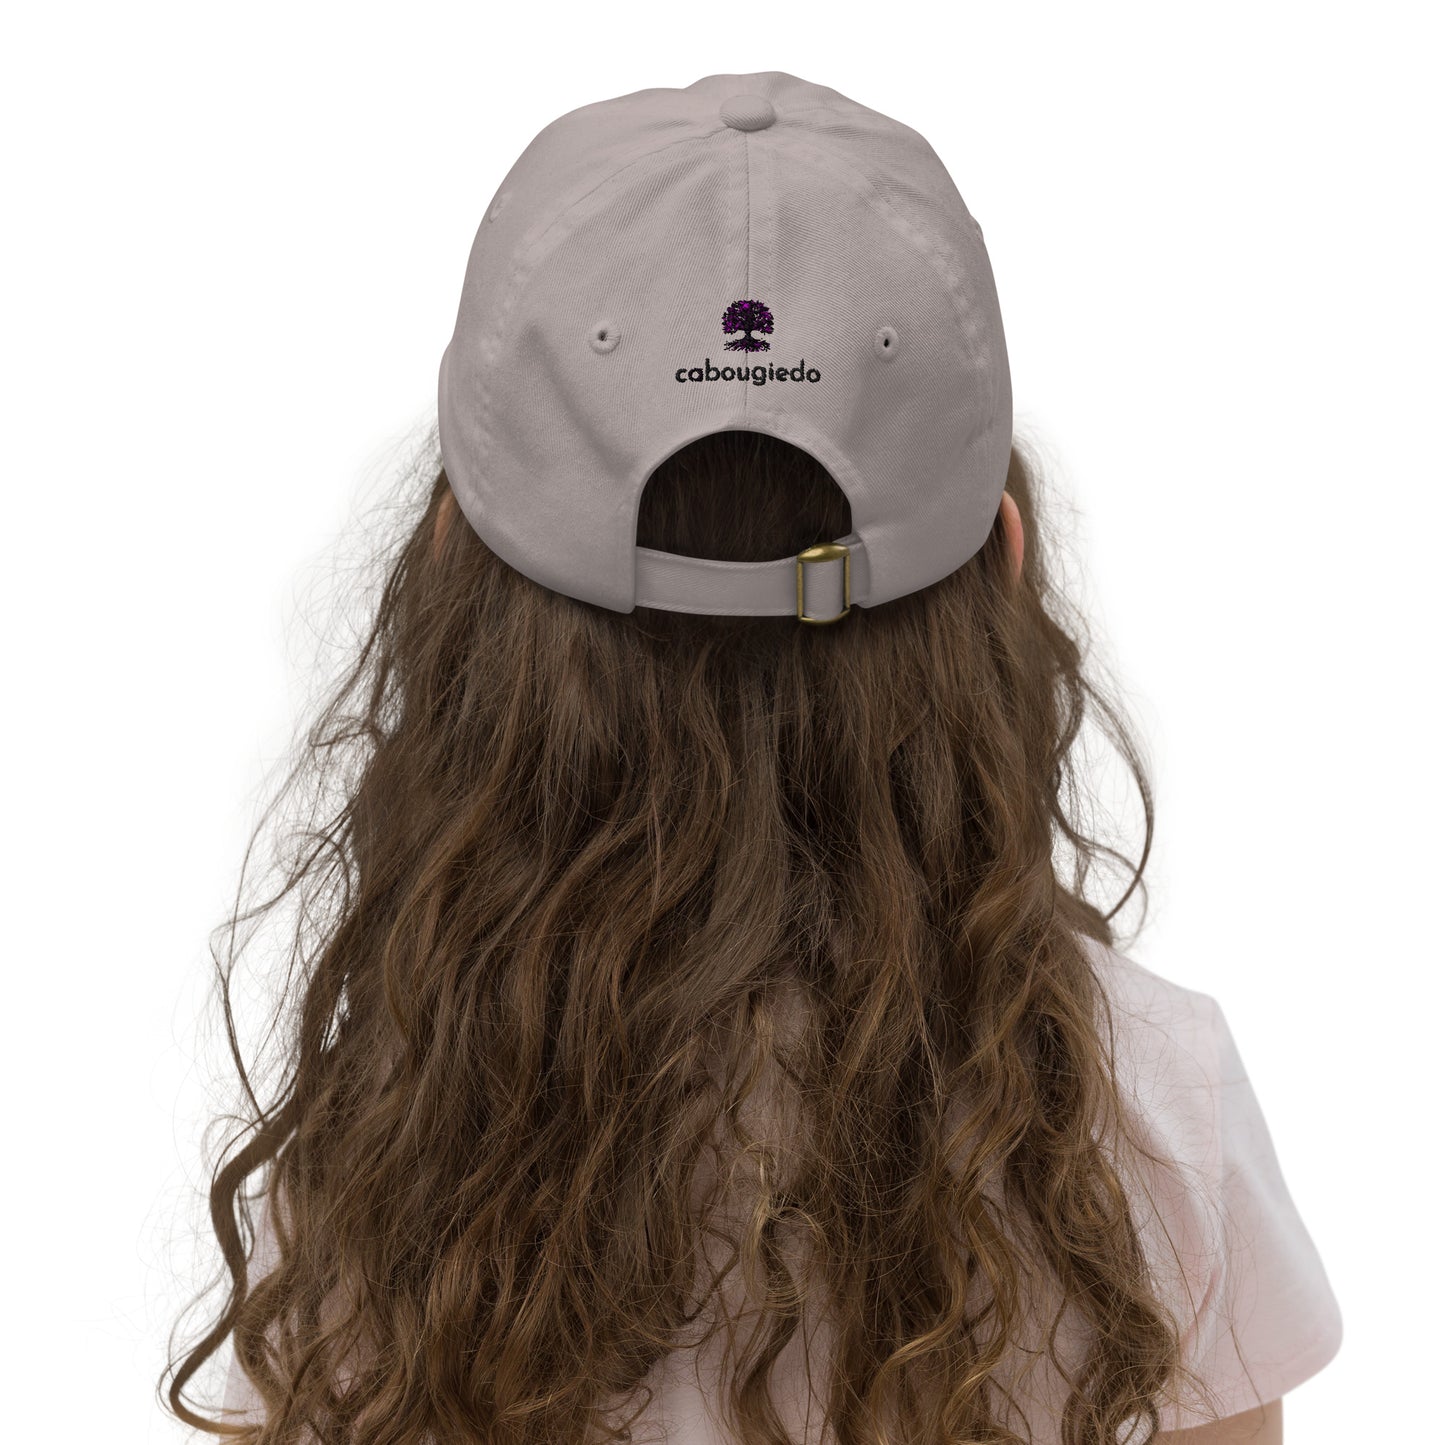 Youth baseball cap - The Lord is My Shepherd Psalms 25:1